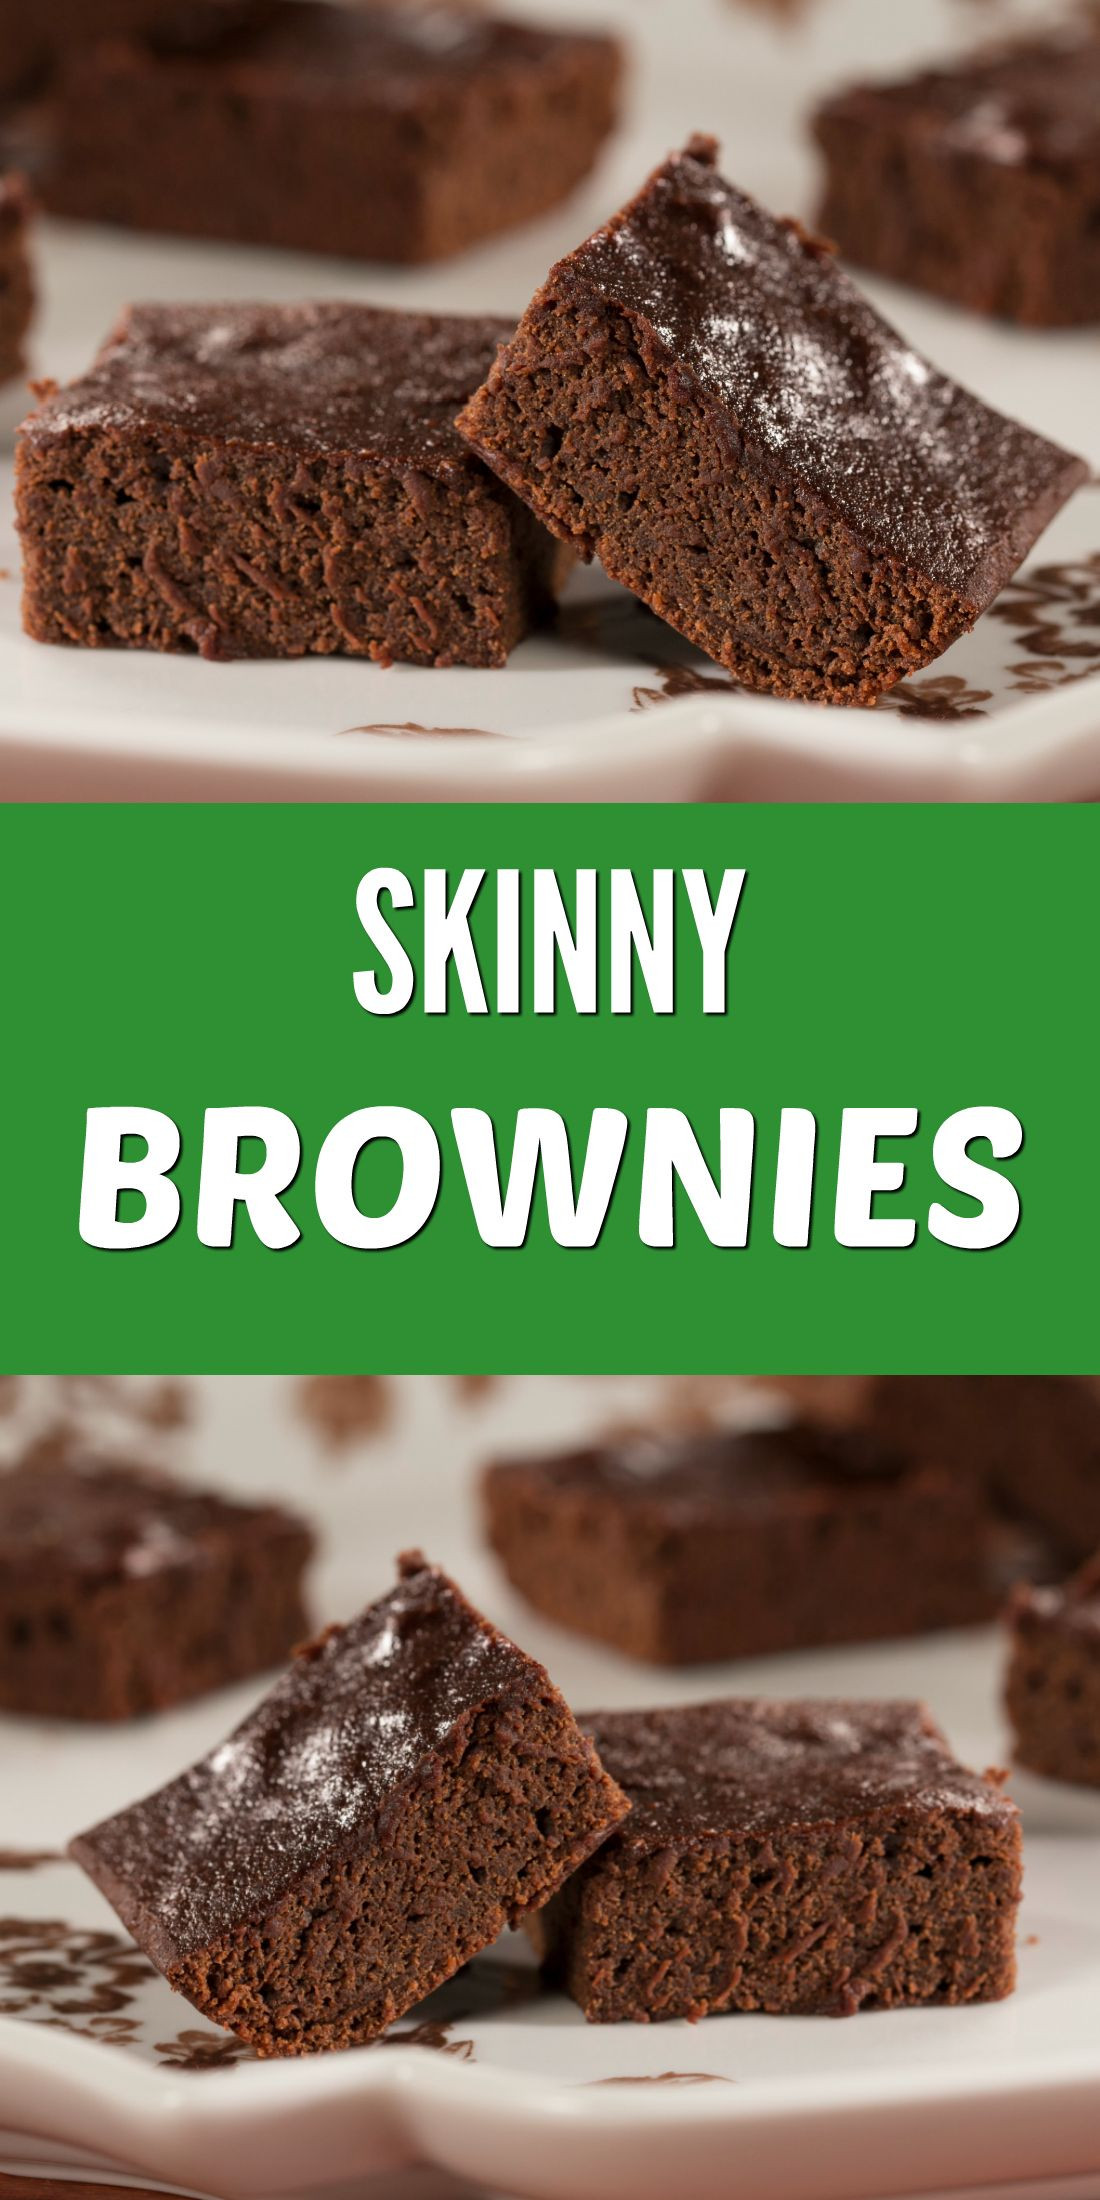 Diabetic Easter Recipes
 Skinny Brownies Recipe With images